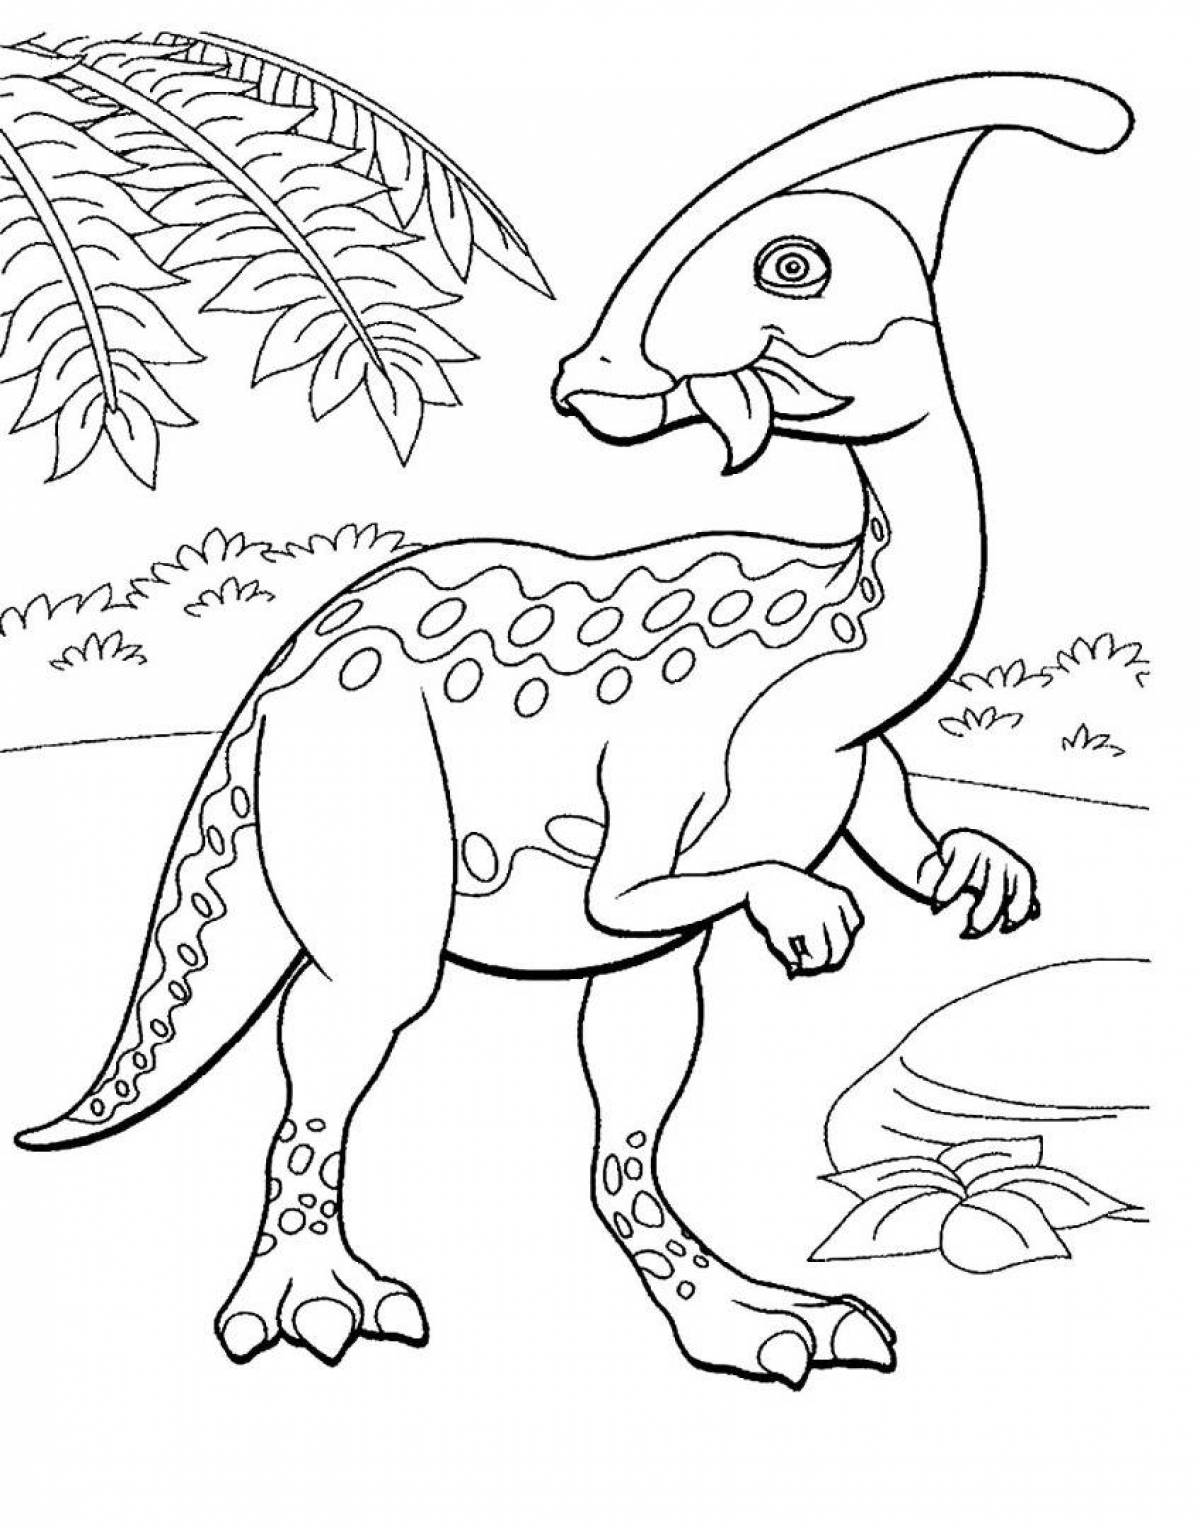 Adventurous dinosaurs coloring pages for boys